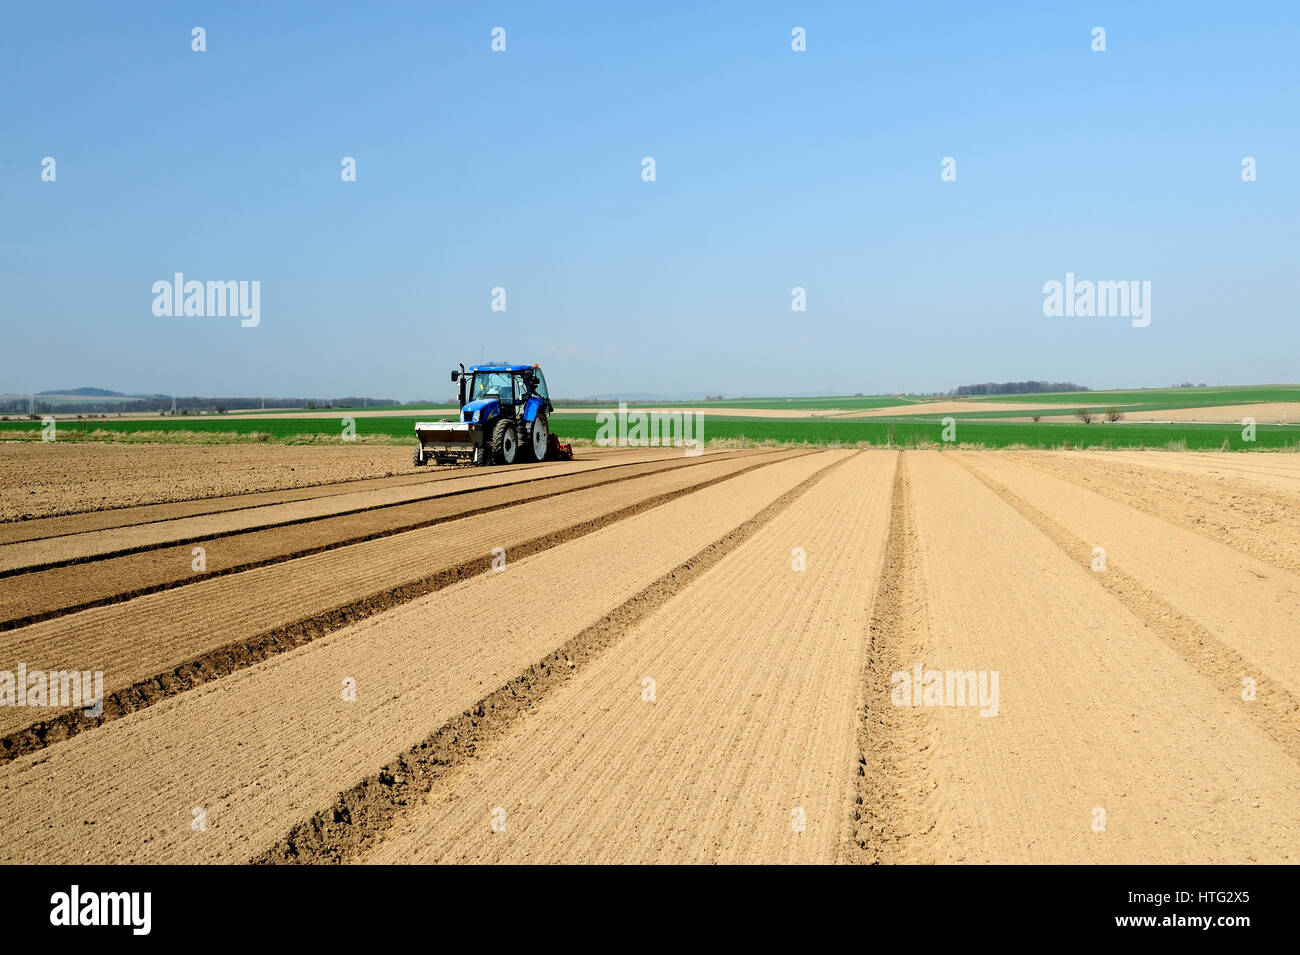 agricultural, agriculture, center, country, crop, crops, farm, farming, farms, field, fields, grain, grains, green, grow, growing, grows, id, Stock Photo